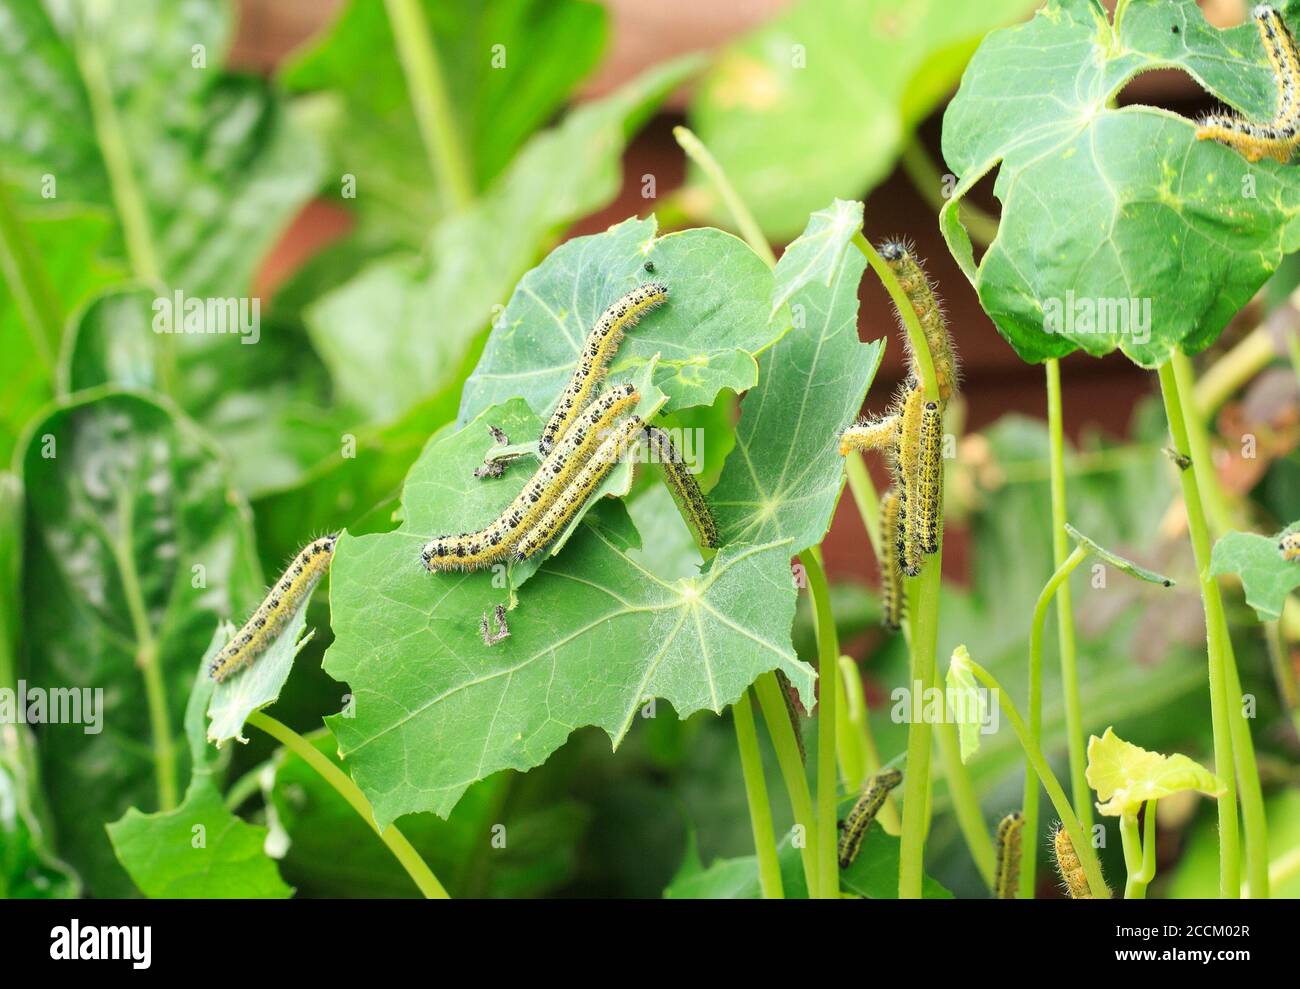 Cluster of White Cabbage Leaf Butterfly Caterpillars feeding in a lush green Nasturtium leaf Stock Photo